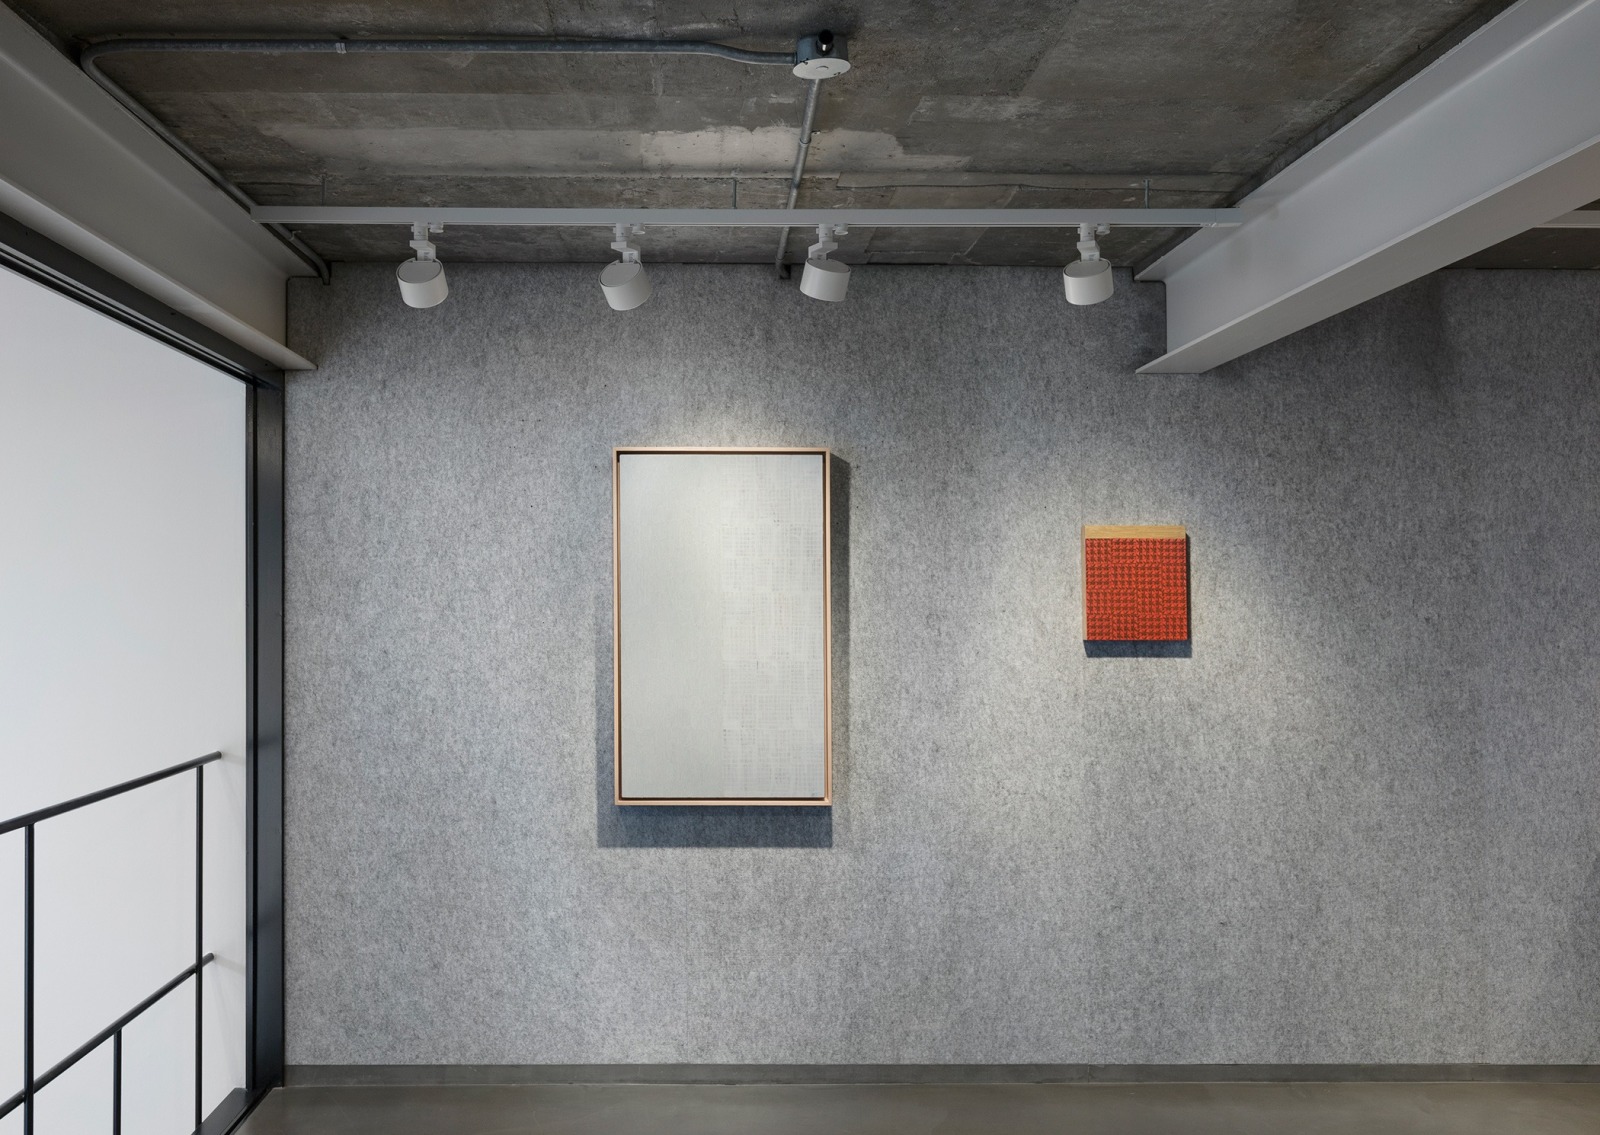 Eighth installation view of the group exhibition Inside Out: The Body Politic at Lehmann Maupin Seoul